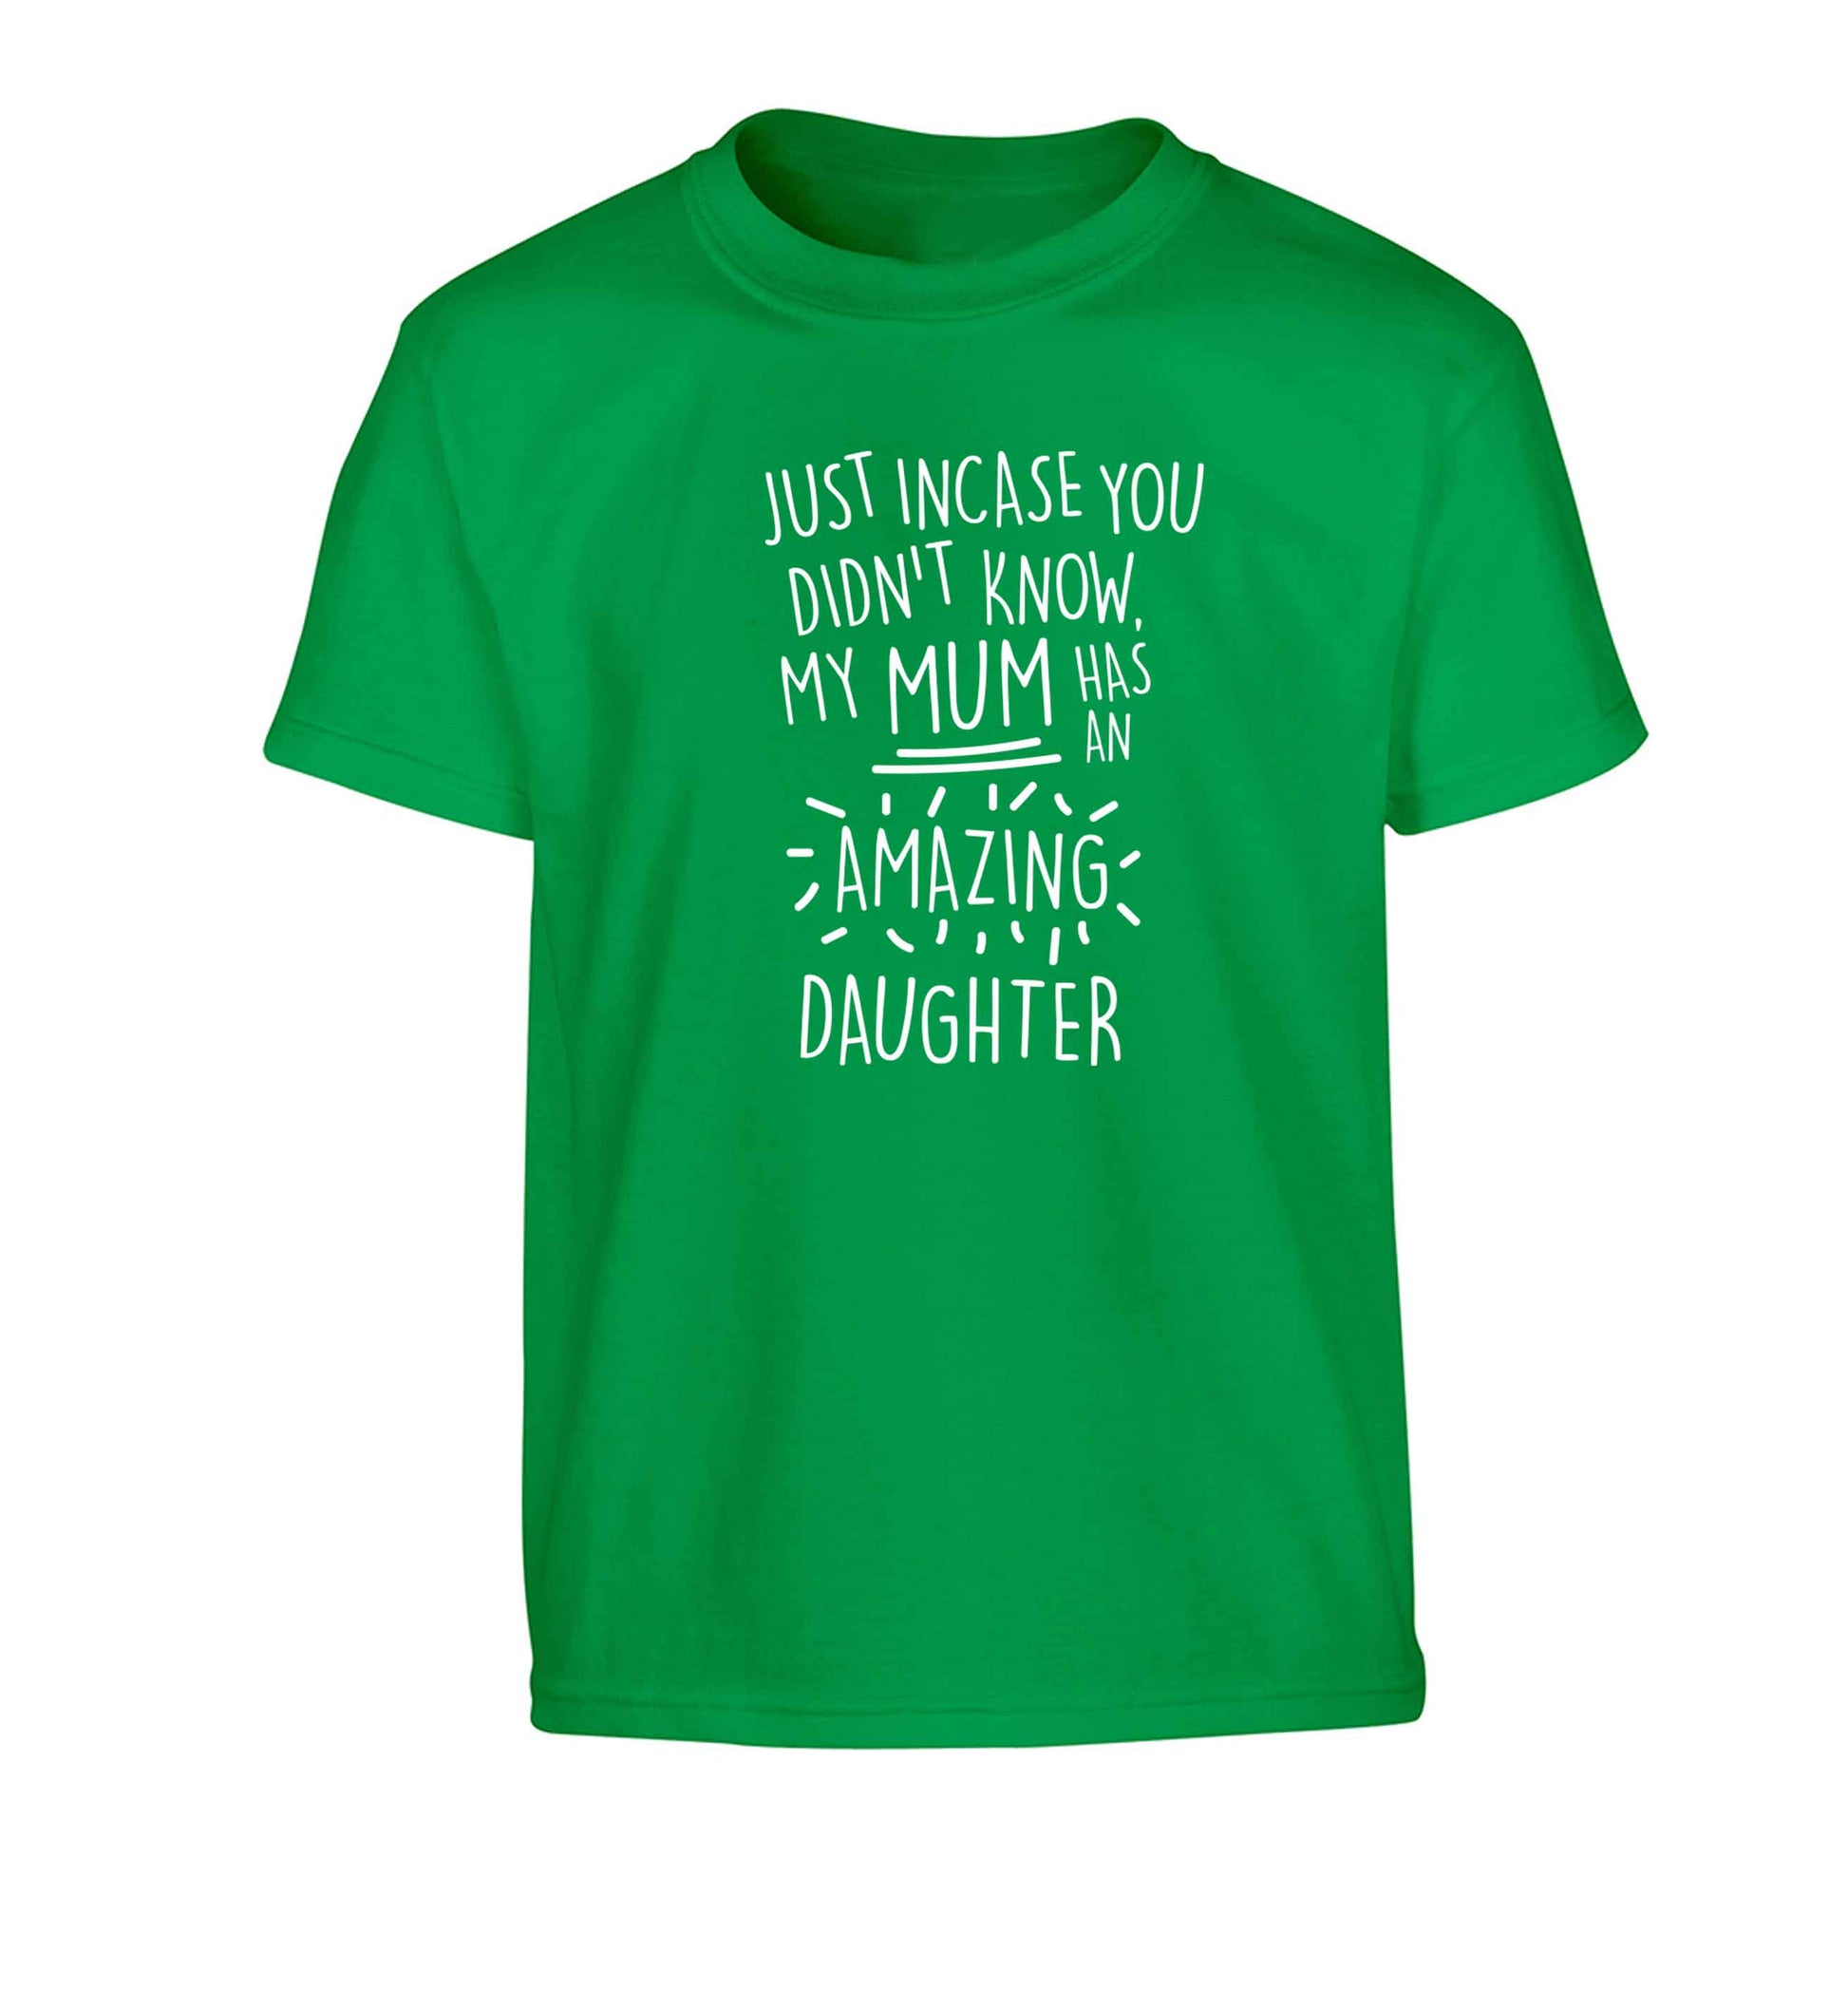 Just incase you didn't know my mum has an amazing daughter Children's green Tshirt 12-13 Years